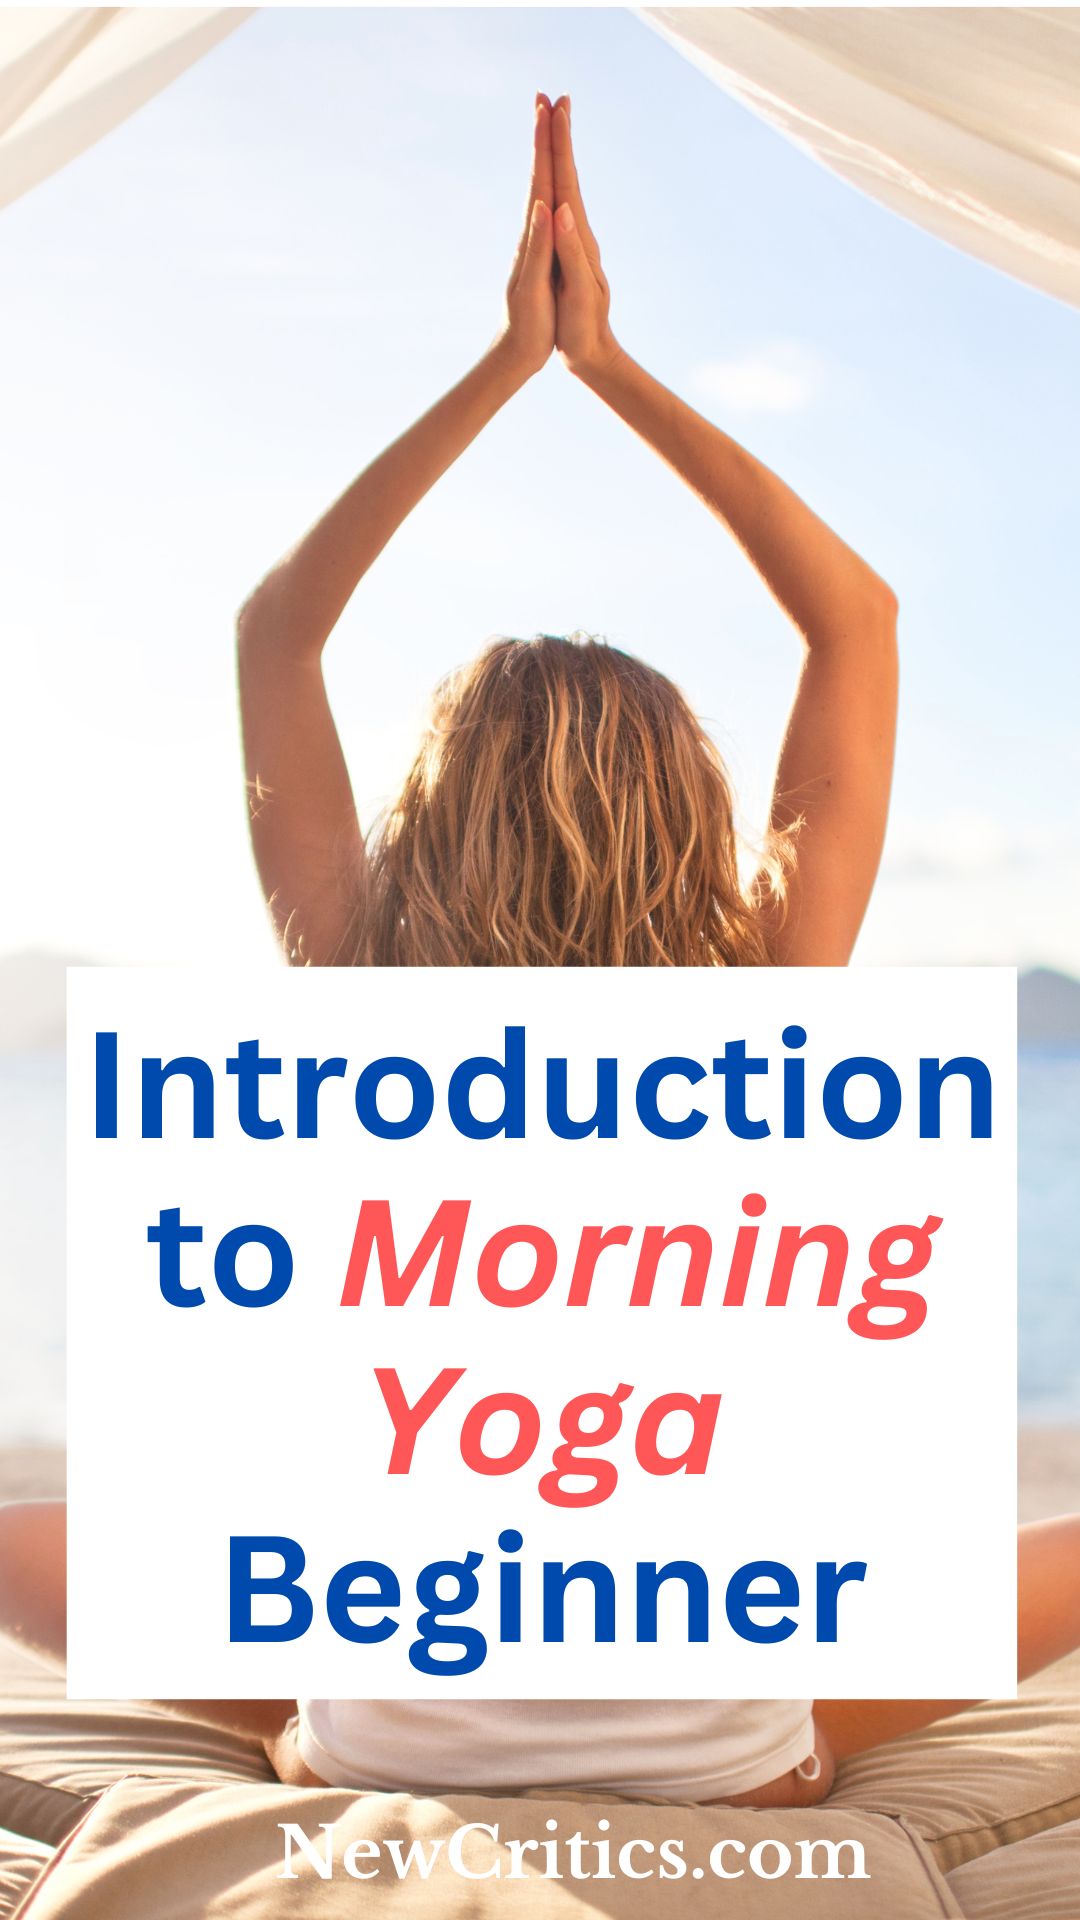 Introduction to Morning Yoga Beginner / Canva